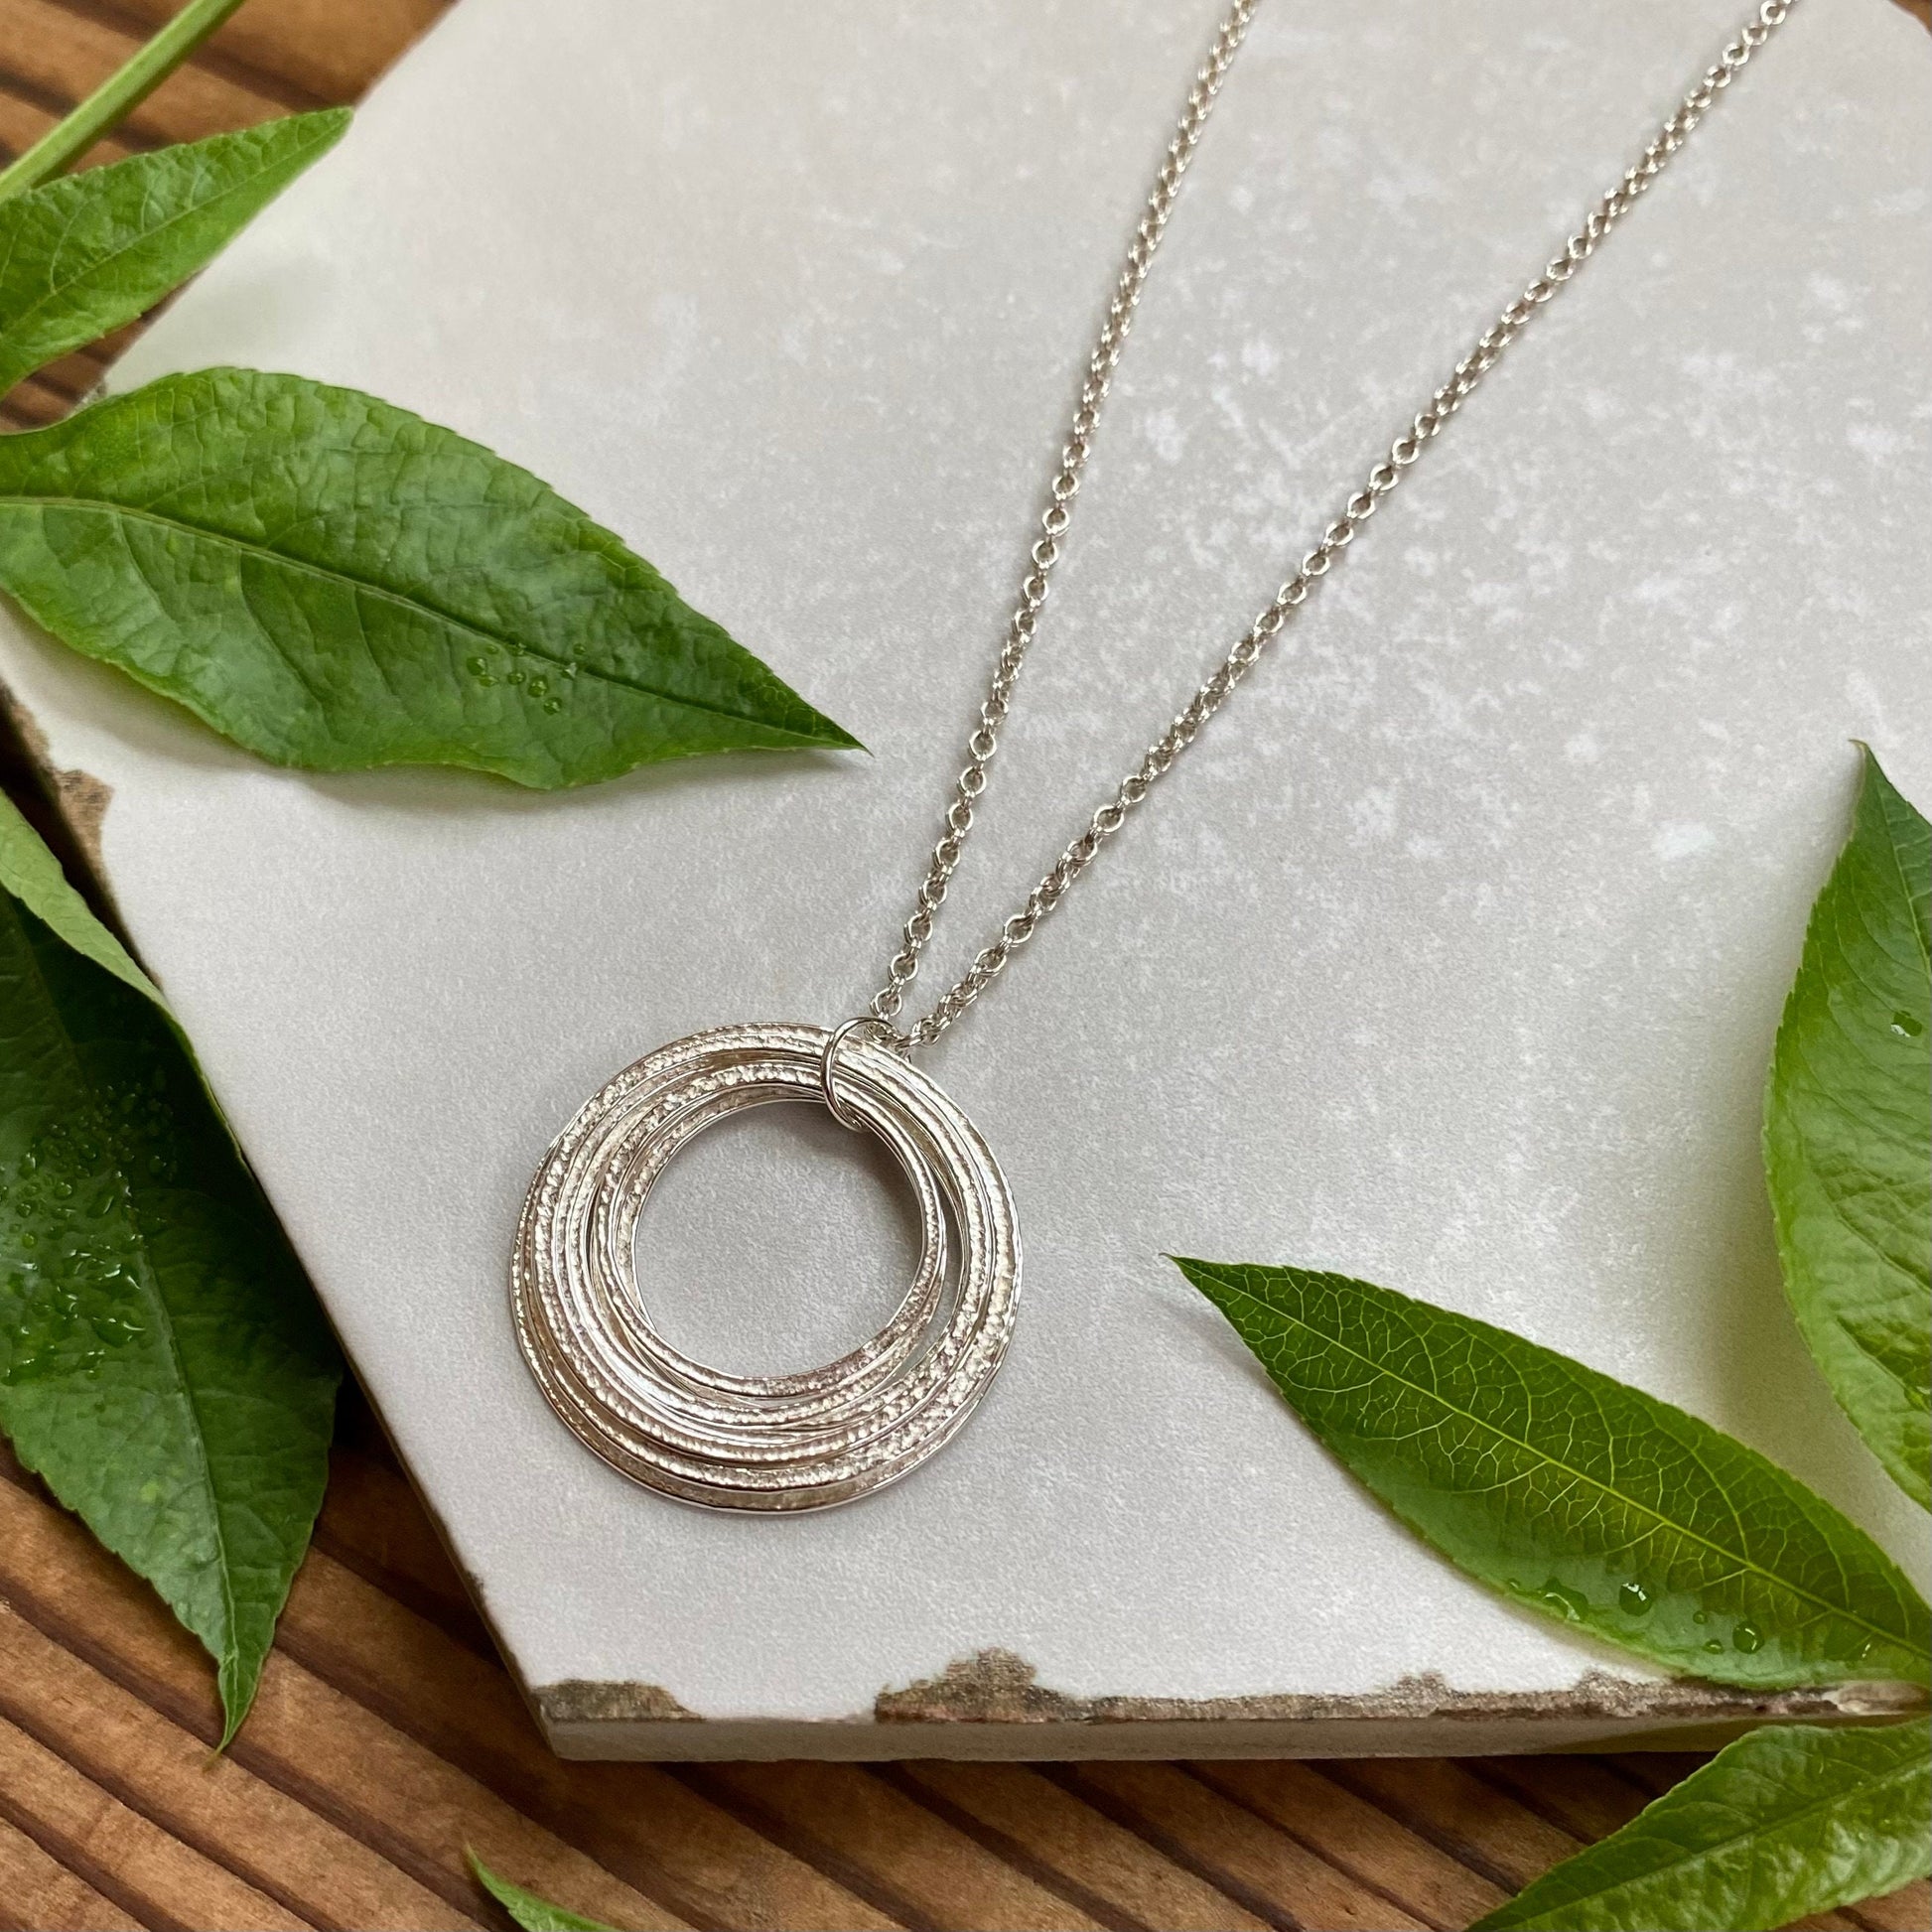 9 Circle 90th Birthday Milestone Necklace, Mid Size Handcrafted Sterling Silver Sparkly 9 Rings for 9 Decades Pendant, Meaningful Gift